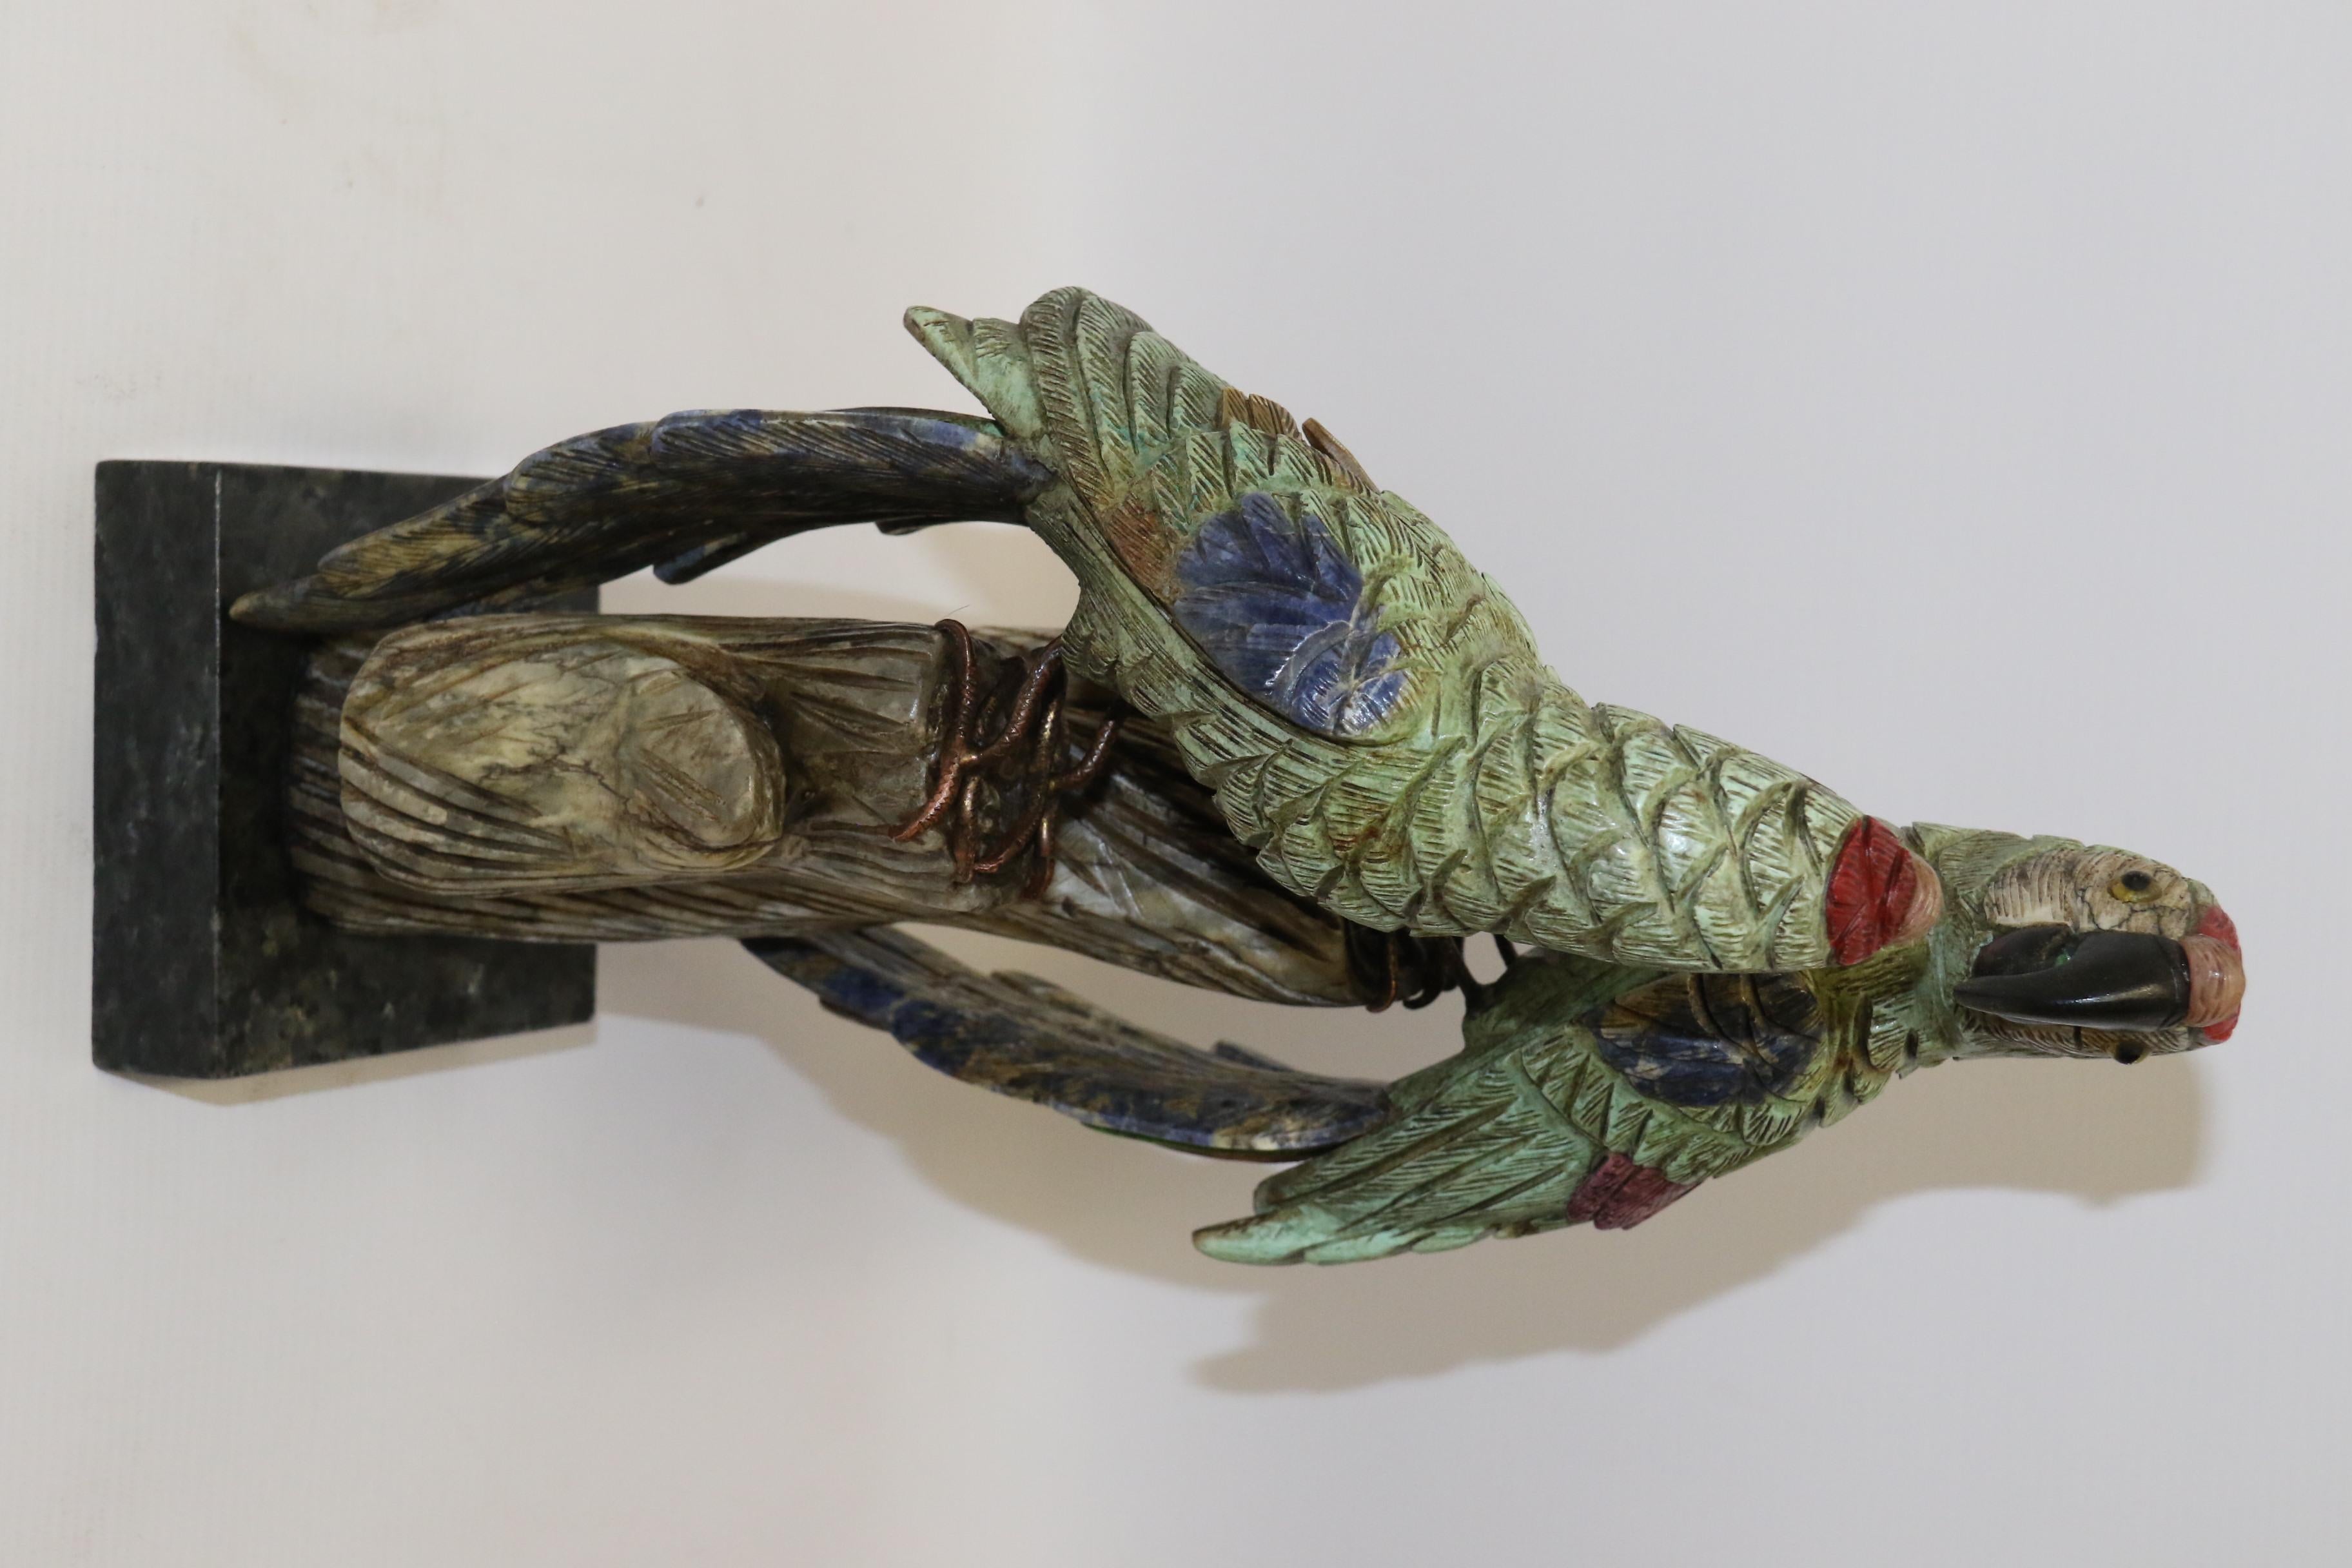 This highly decorative large hand carved sculpture of a pair of parrots sitting on a log whilst looking at each other is most unusual. It is carved from multiple pieces of different colored soapstones and mother of pearl which have been creatively